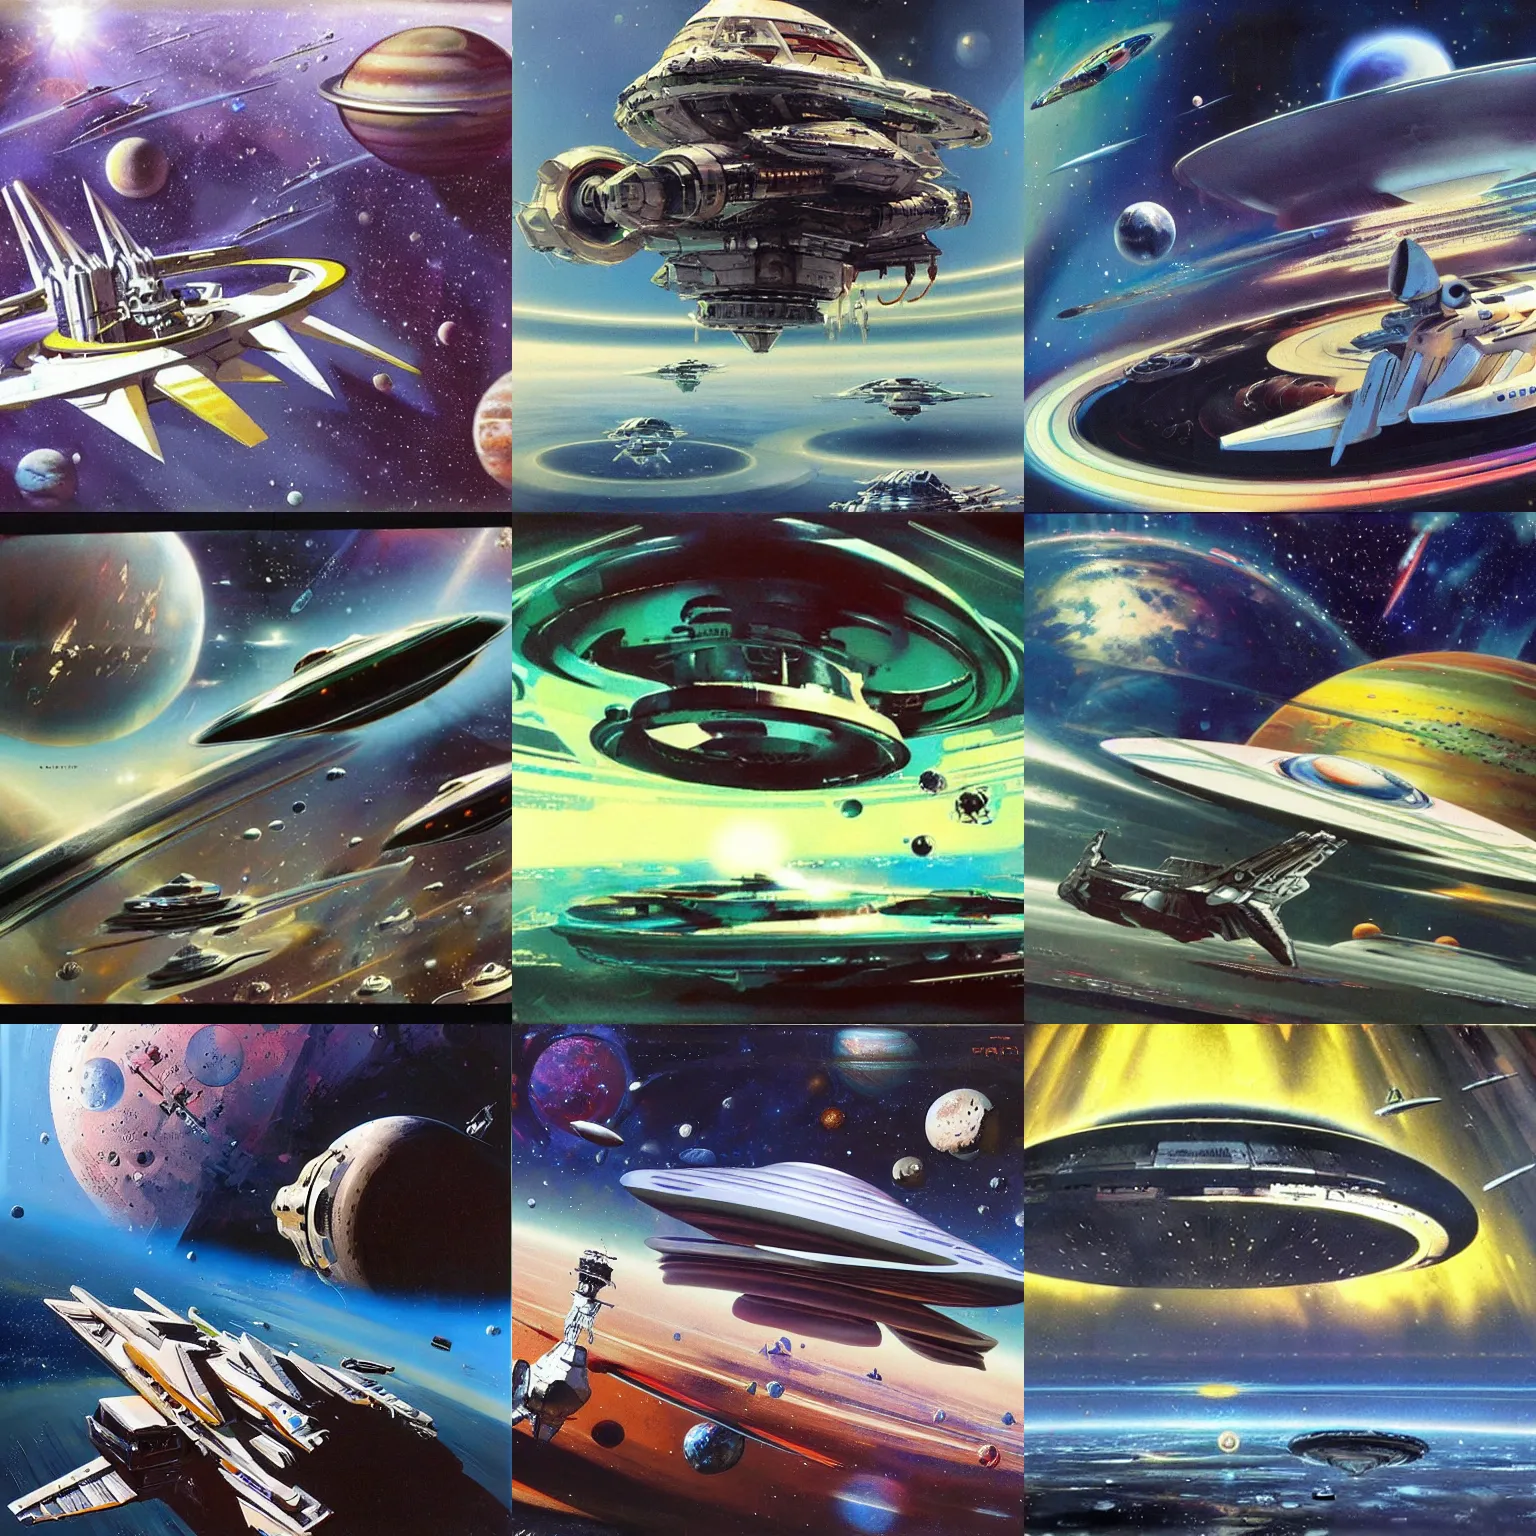 Prompt: spaceship concept art by john berkey. planetary rings in background. technicolor.